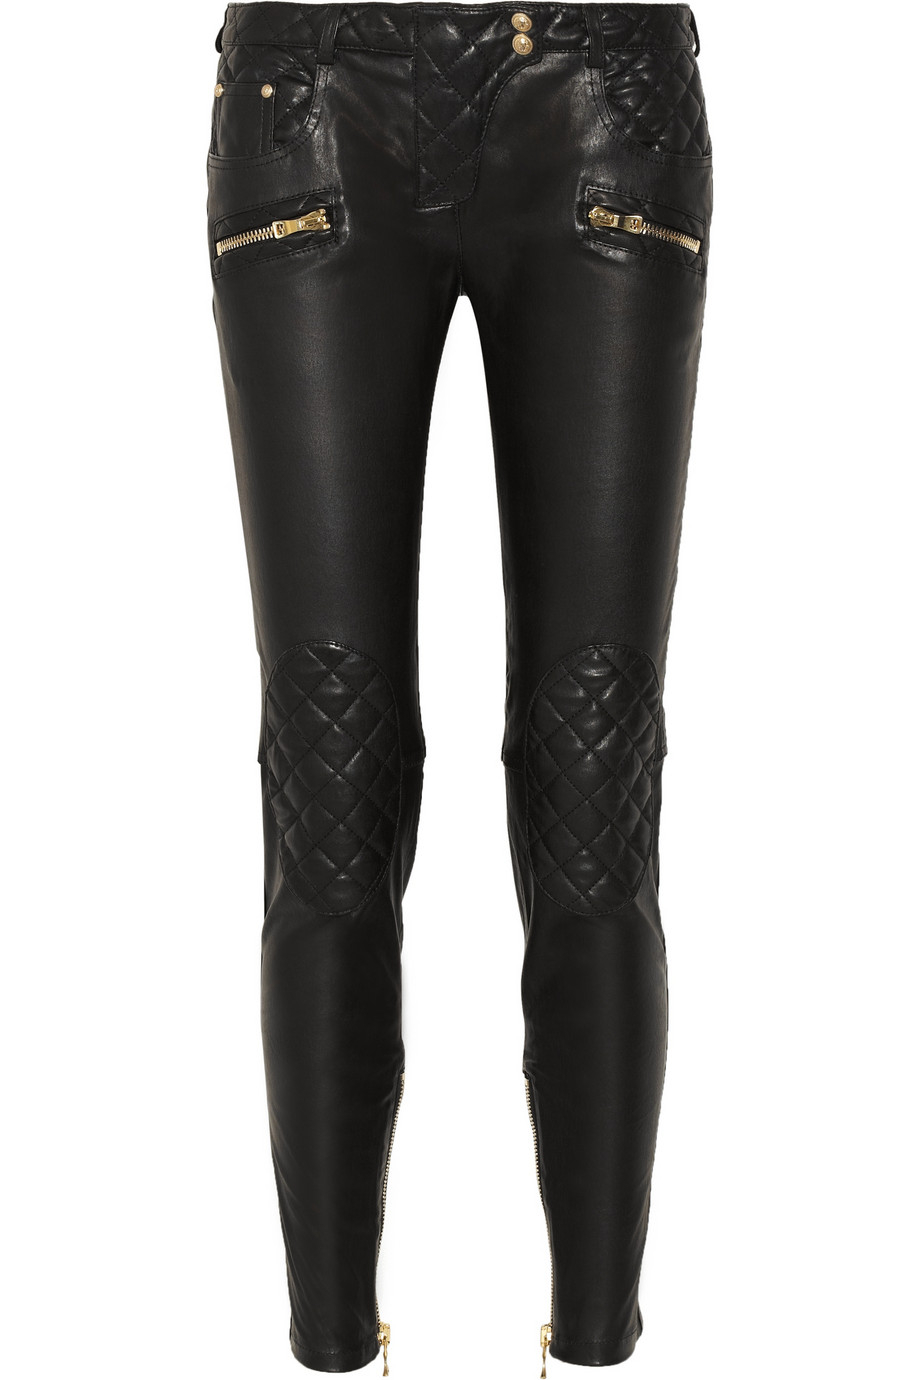 Balmain Quilted Leather Skinny Pants in Black - Lyst